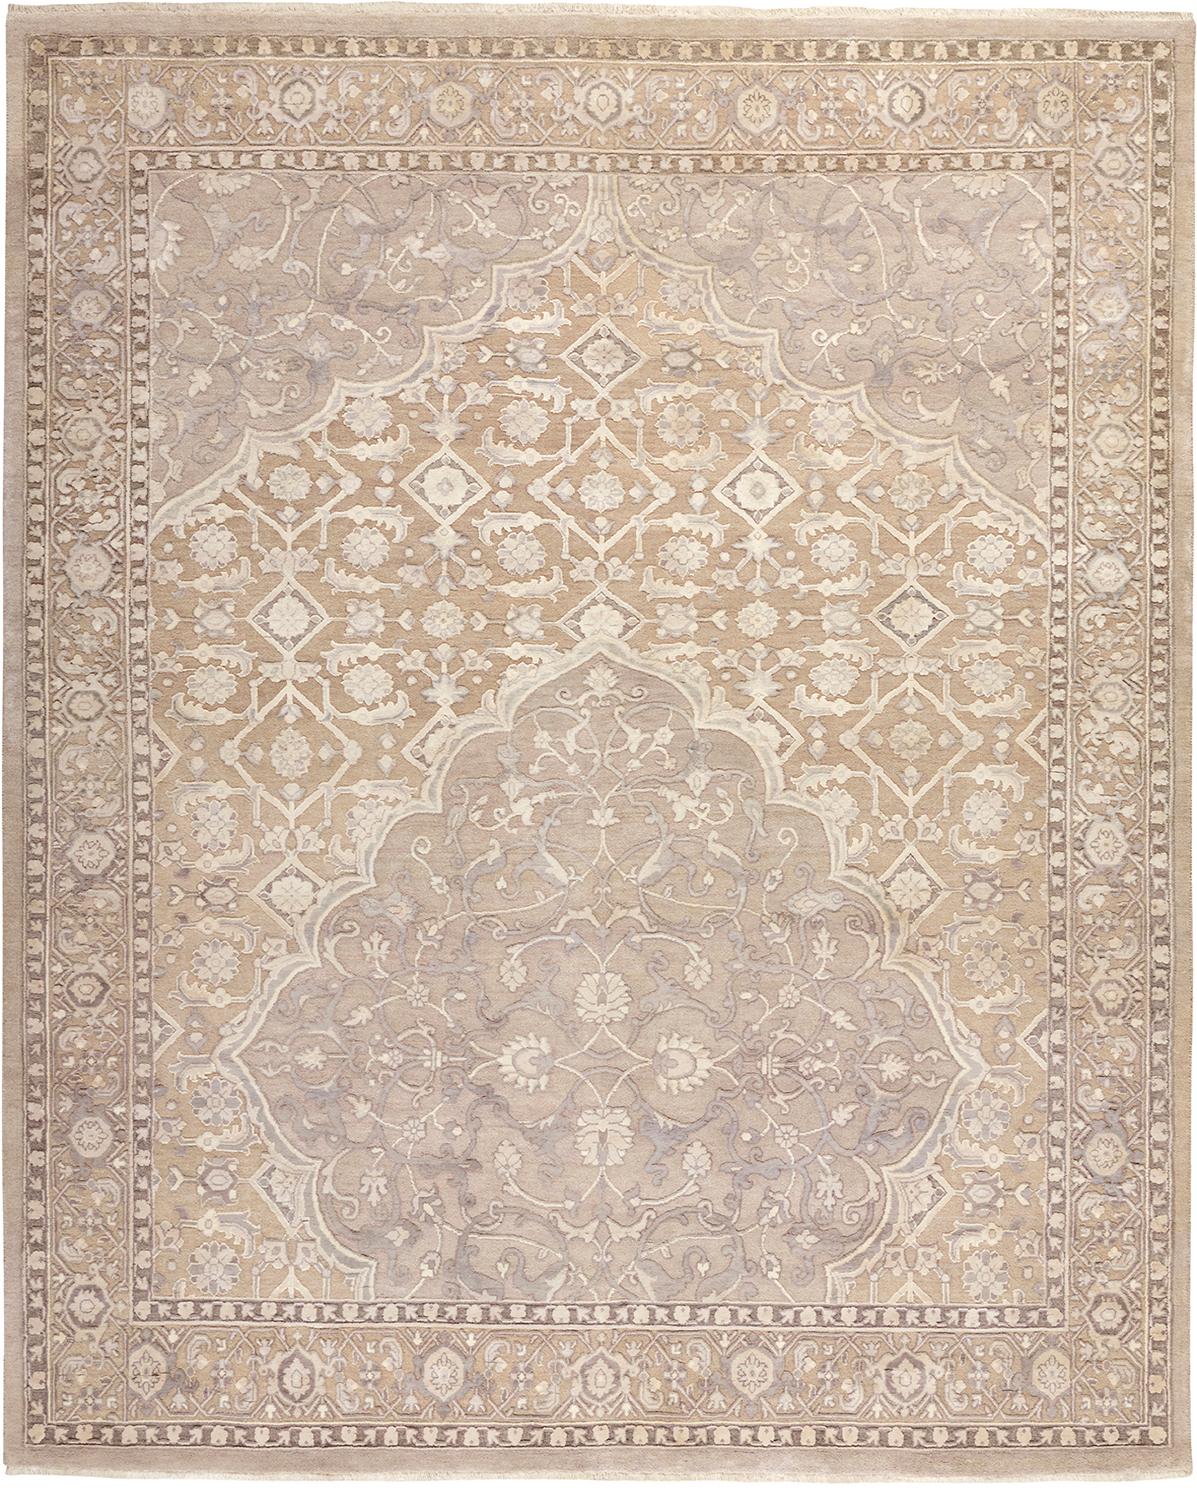 A fascinating antique Persian carpet with a commanding presence, this unique and
alluring antique Halvai Bidjar rug is an intriguing coming together of what would
initially seem to be opposing aesthetic camps. In addition to its